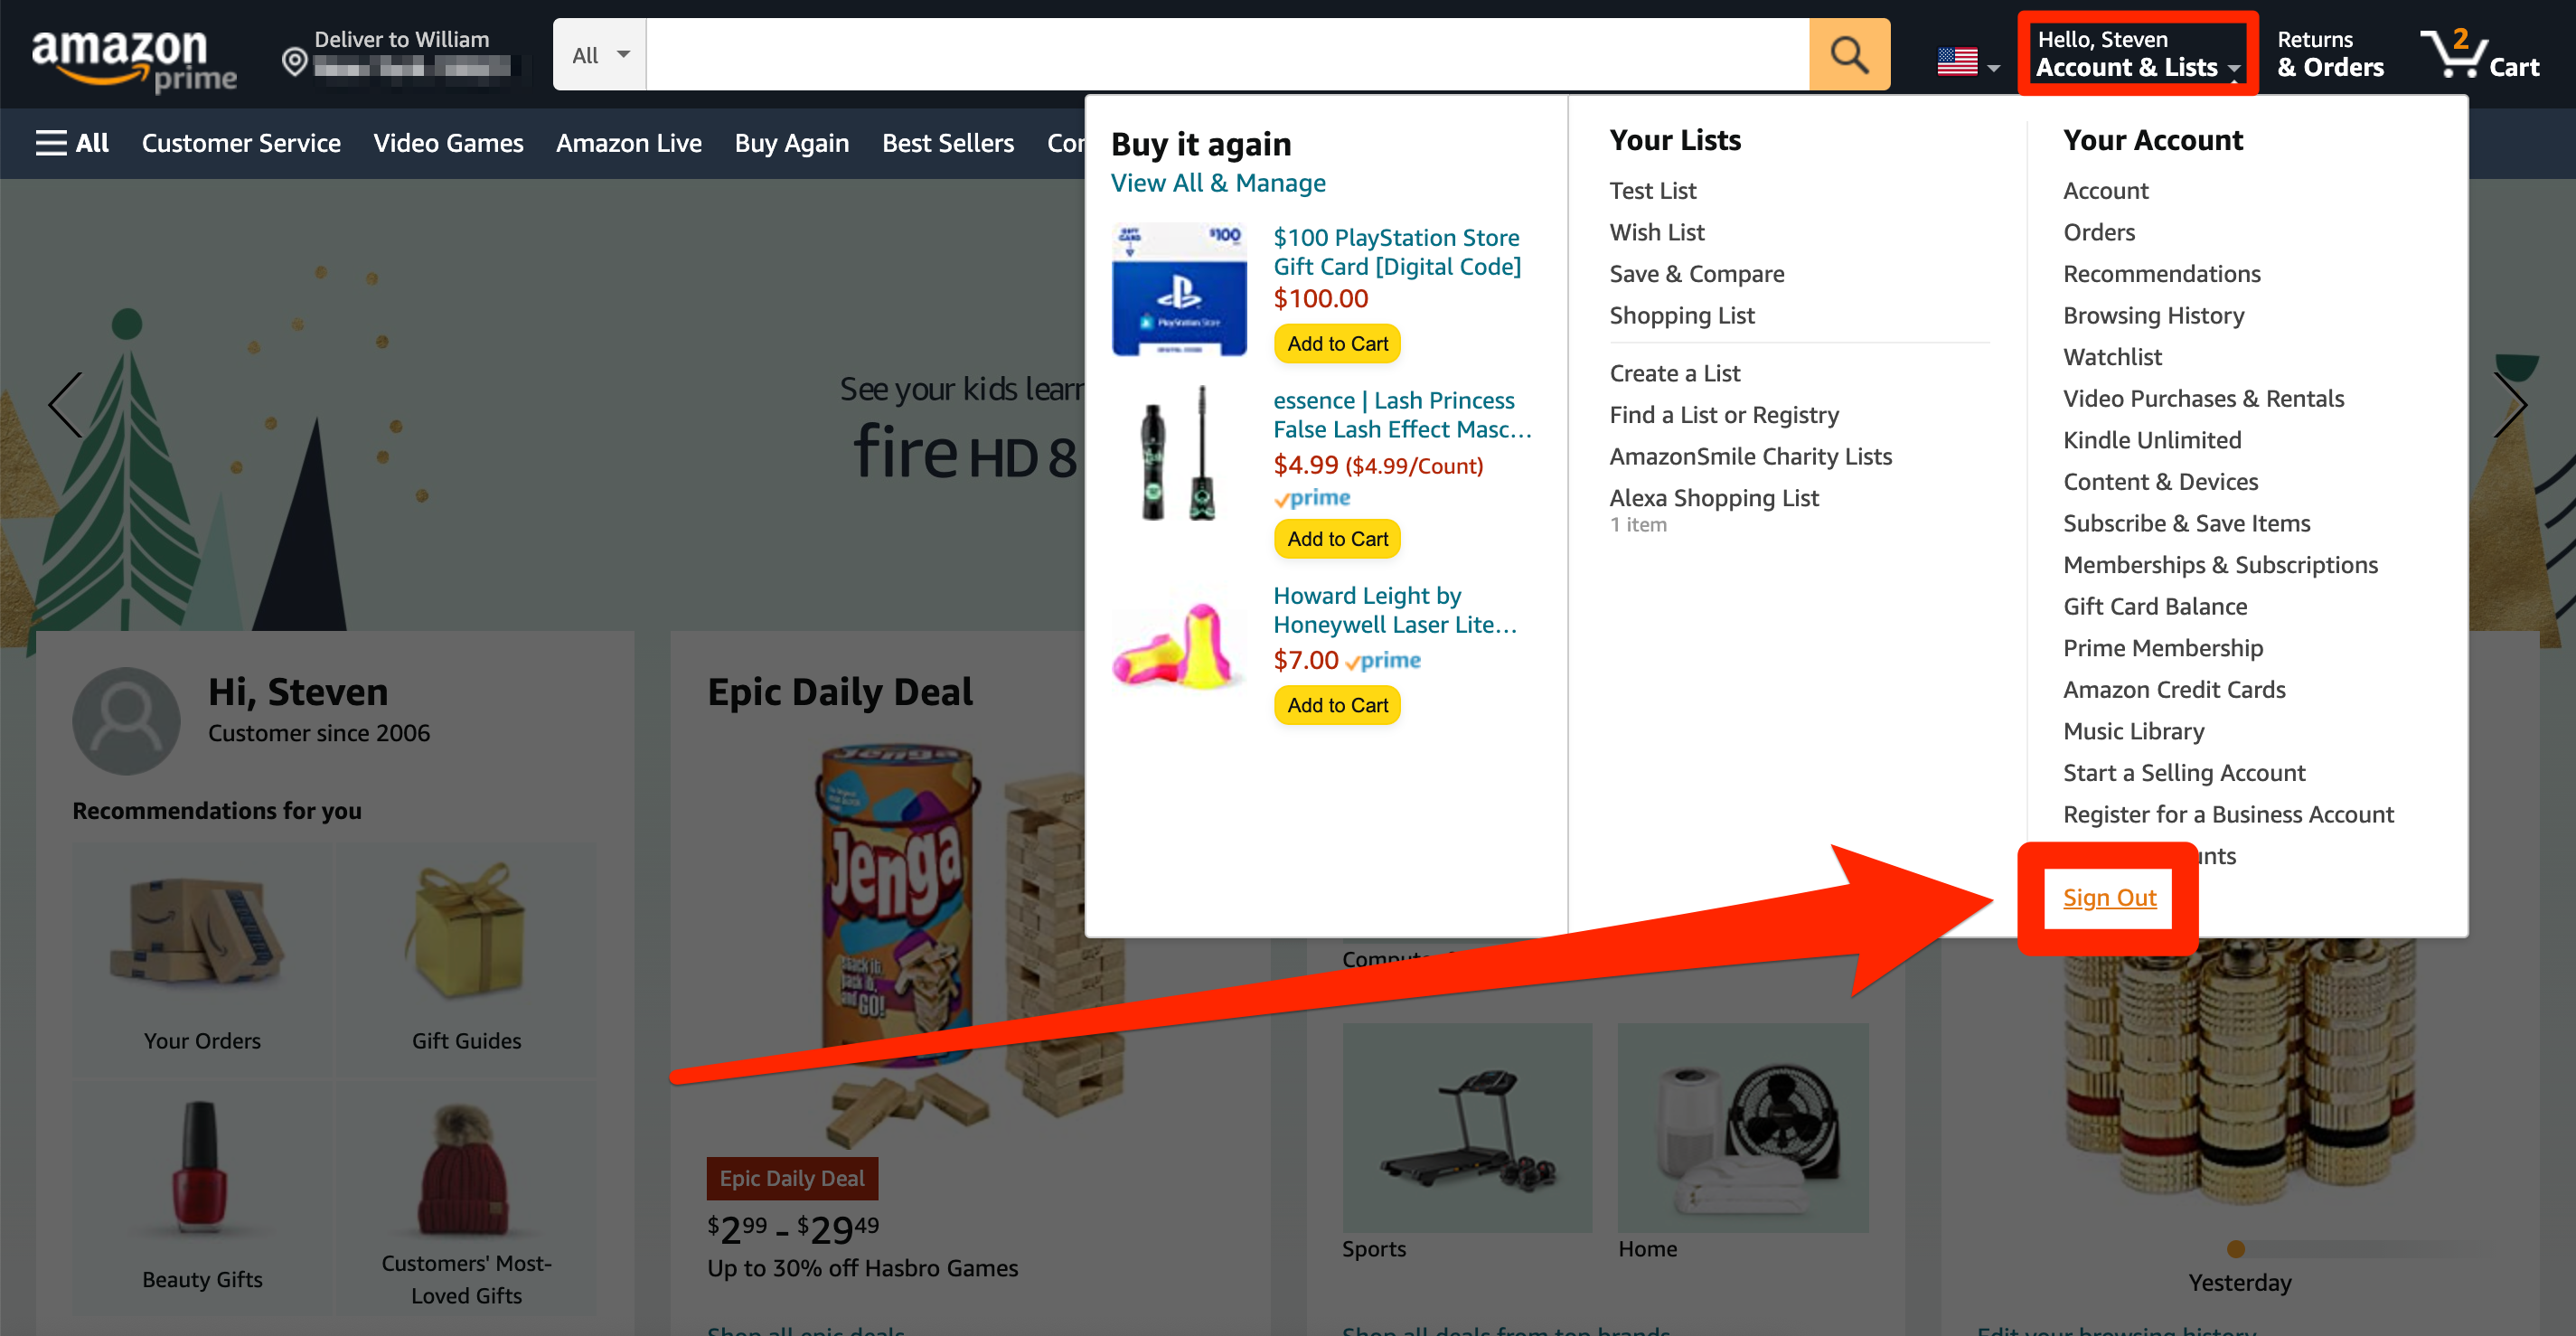 The "Sign Out" option on the Amazon website.